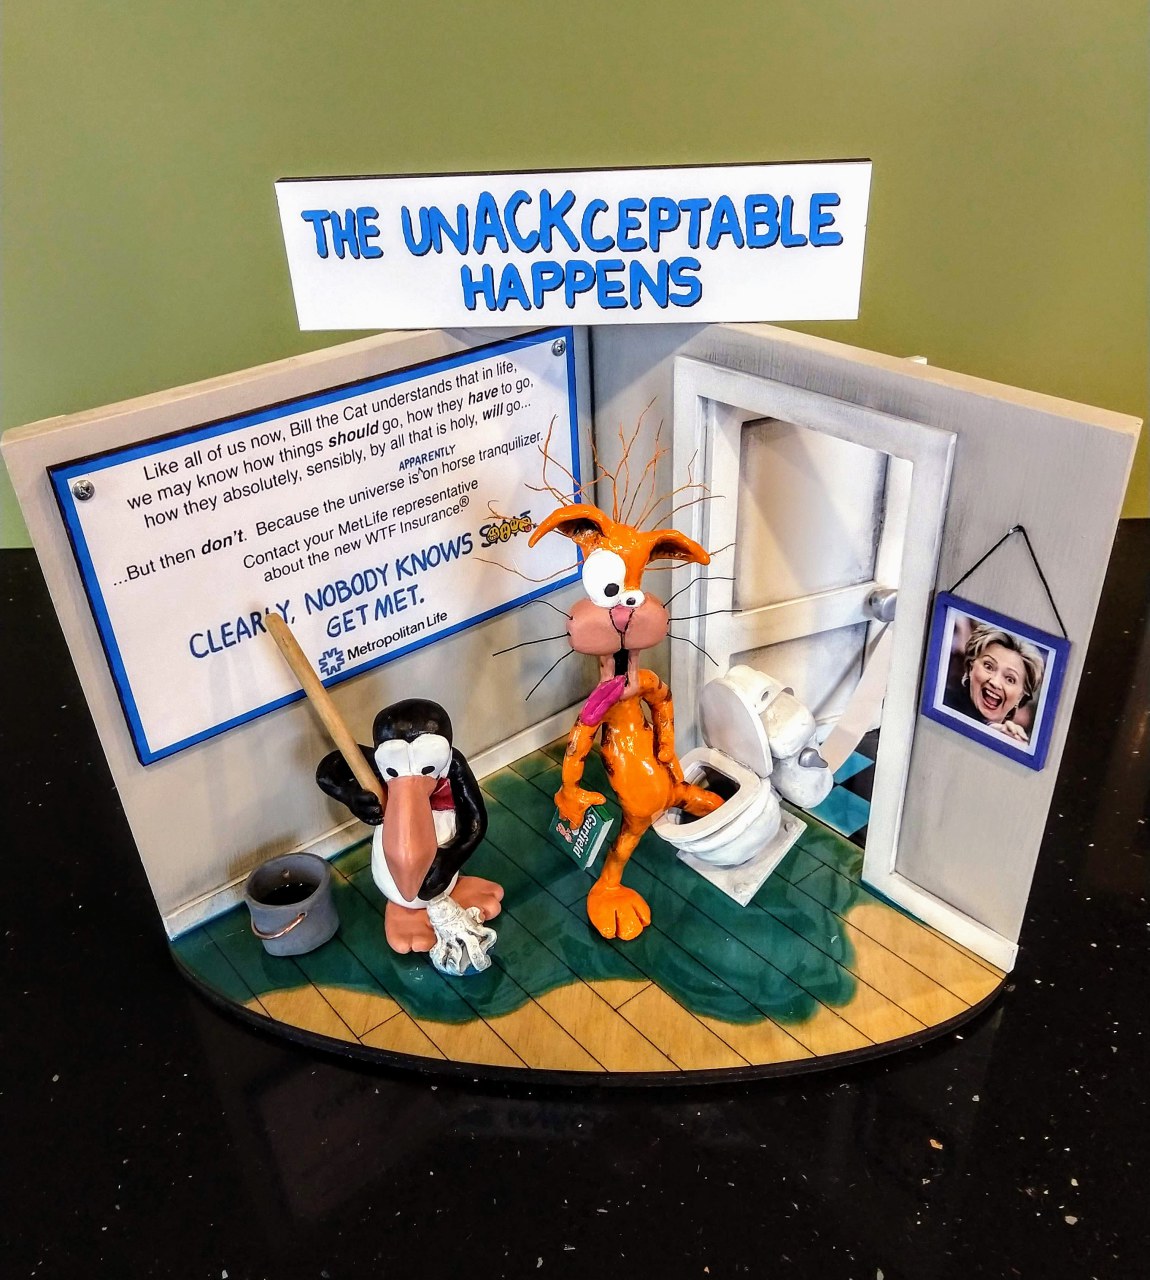 Diorama - Bloom County Opus and Bill